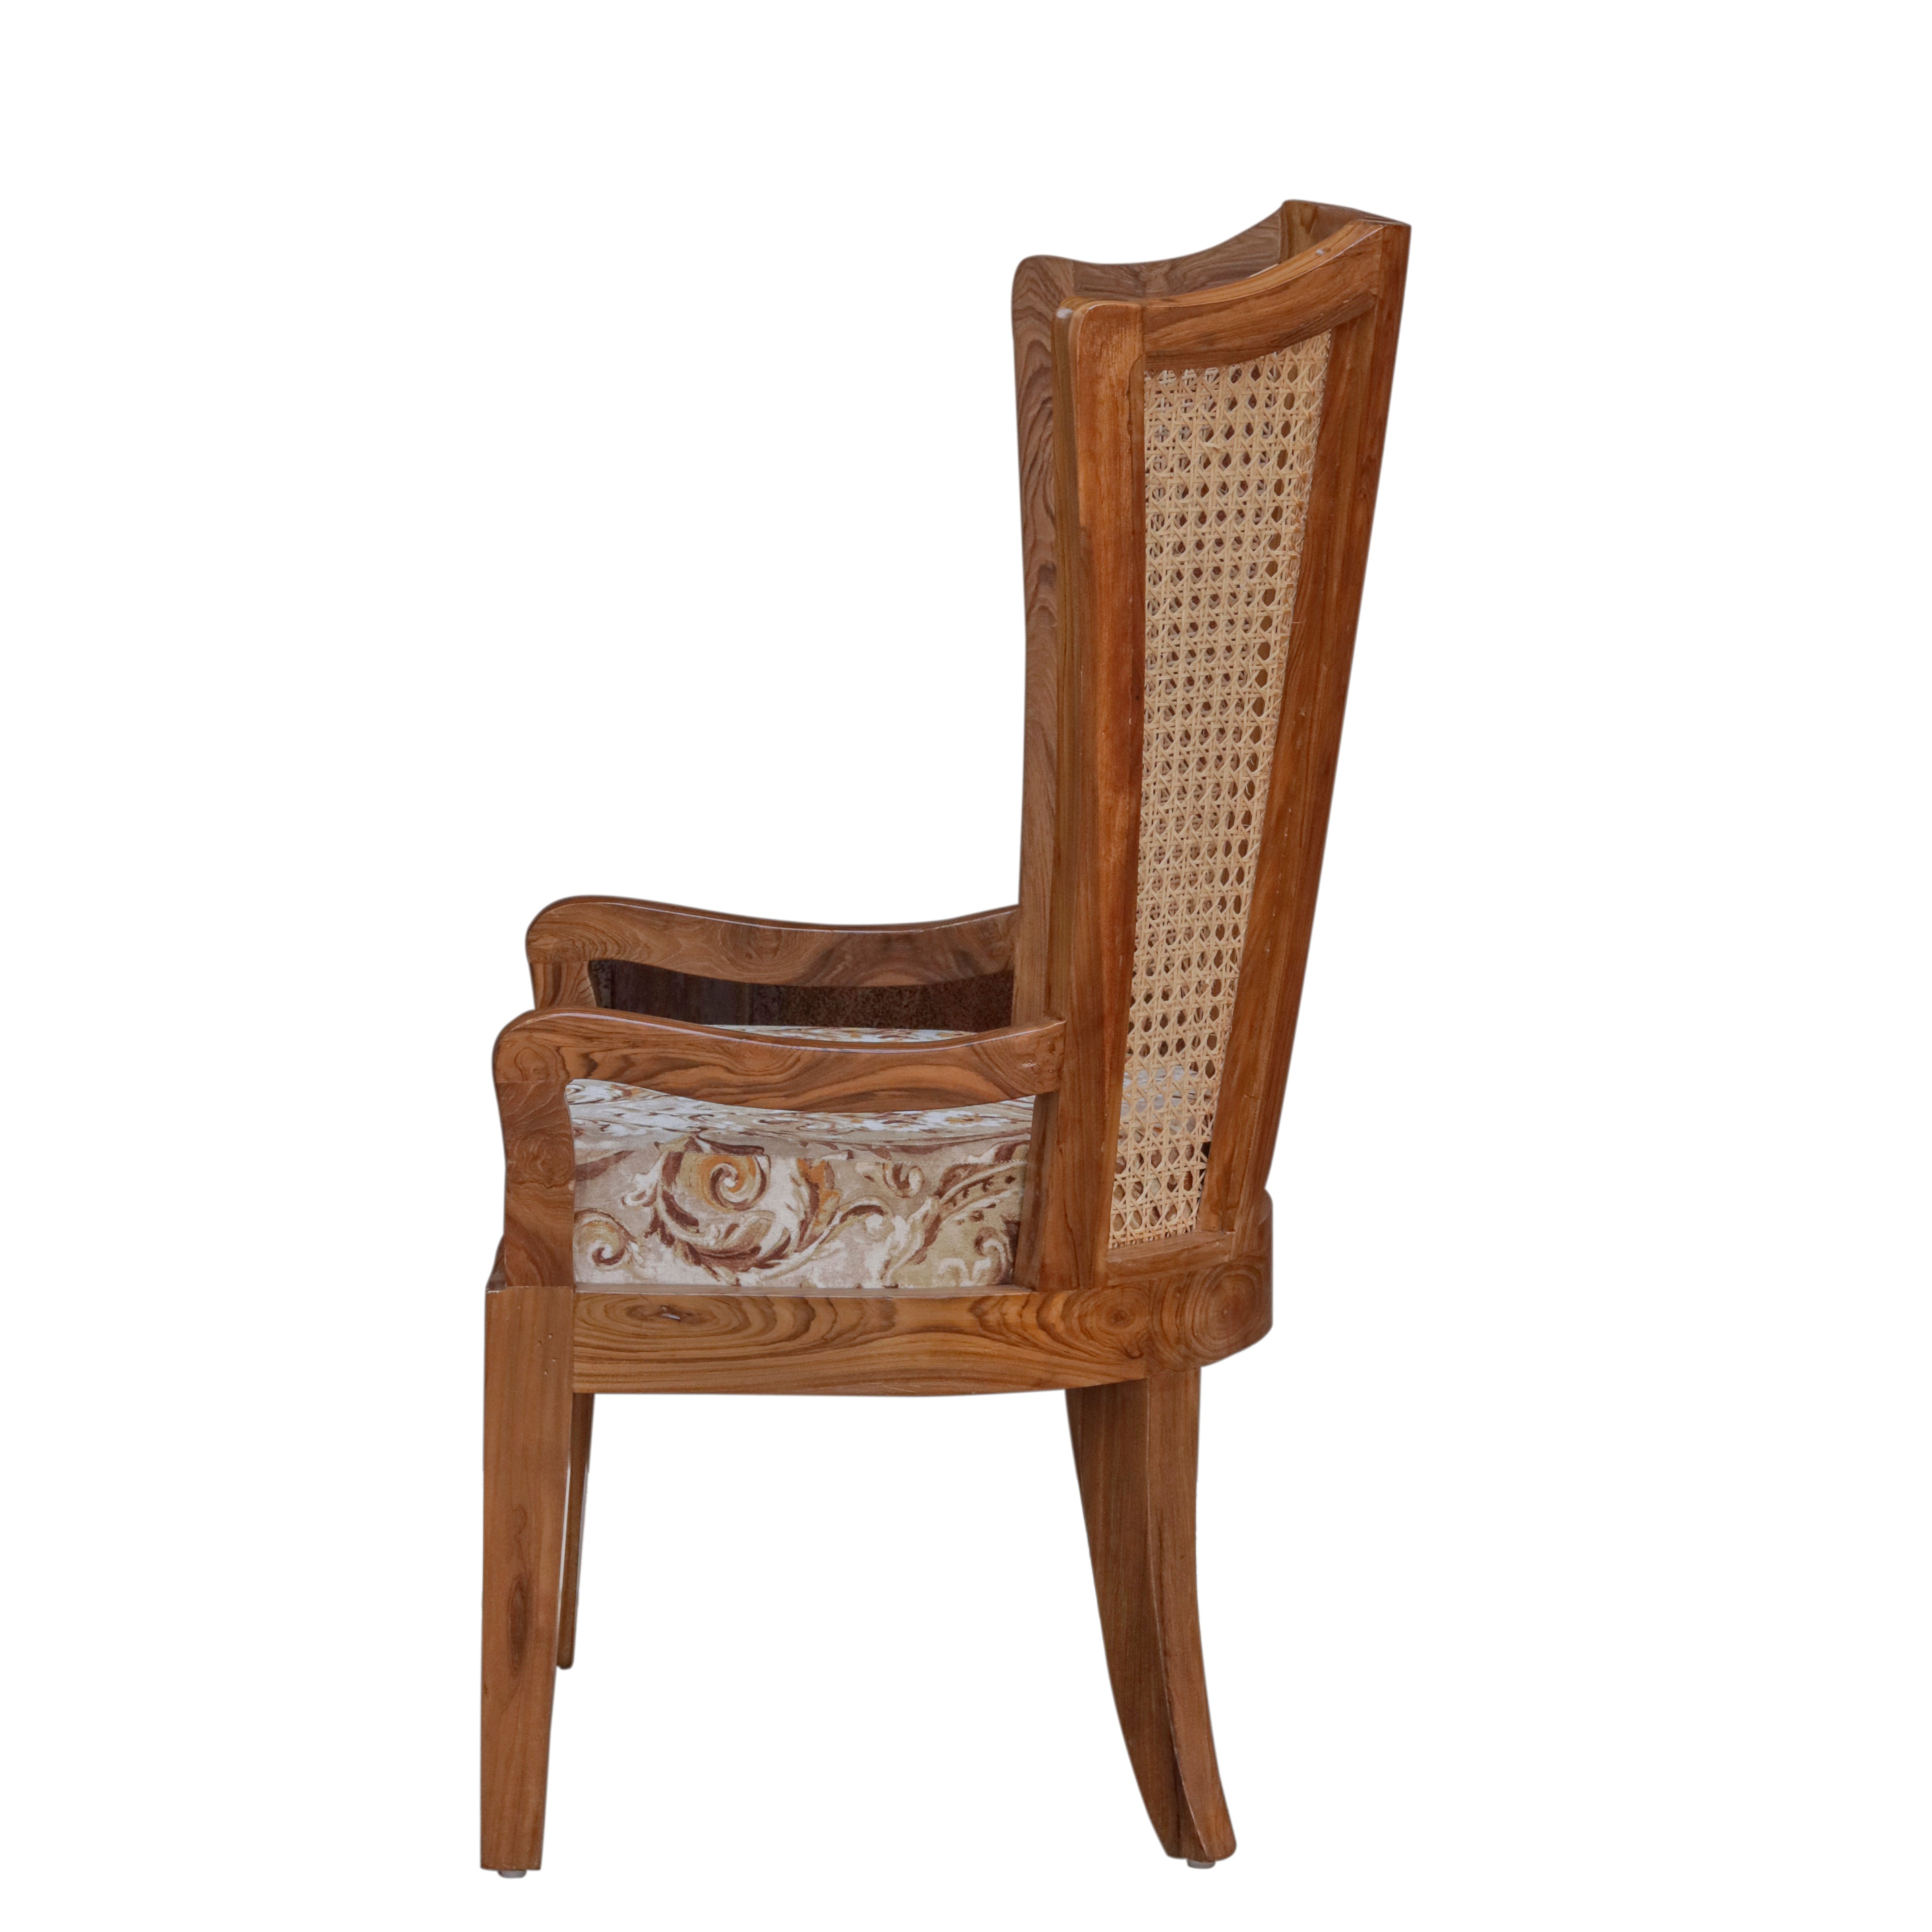 Classic Cane Back Wooden Soft Seating Upholstery Chair Arm Chair